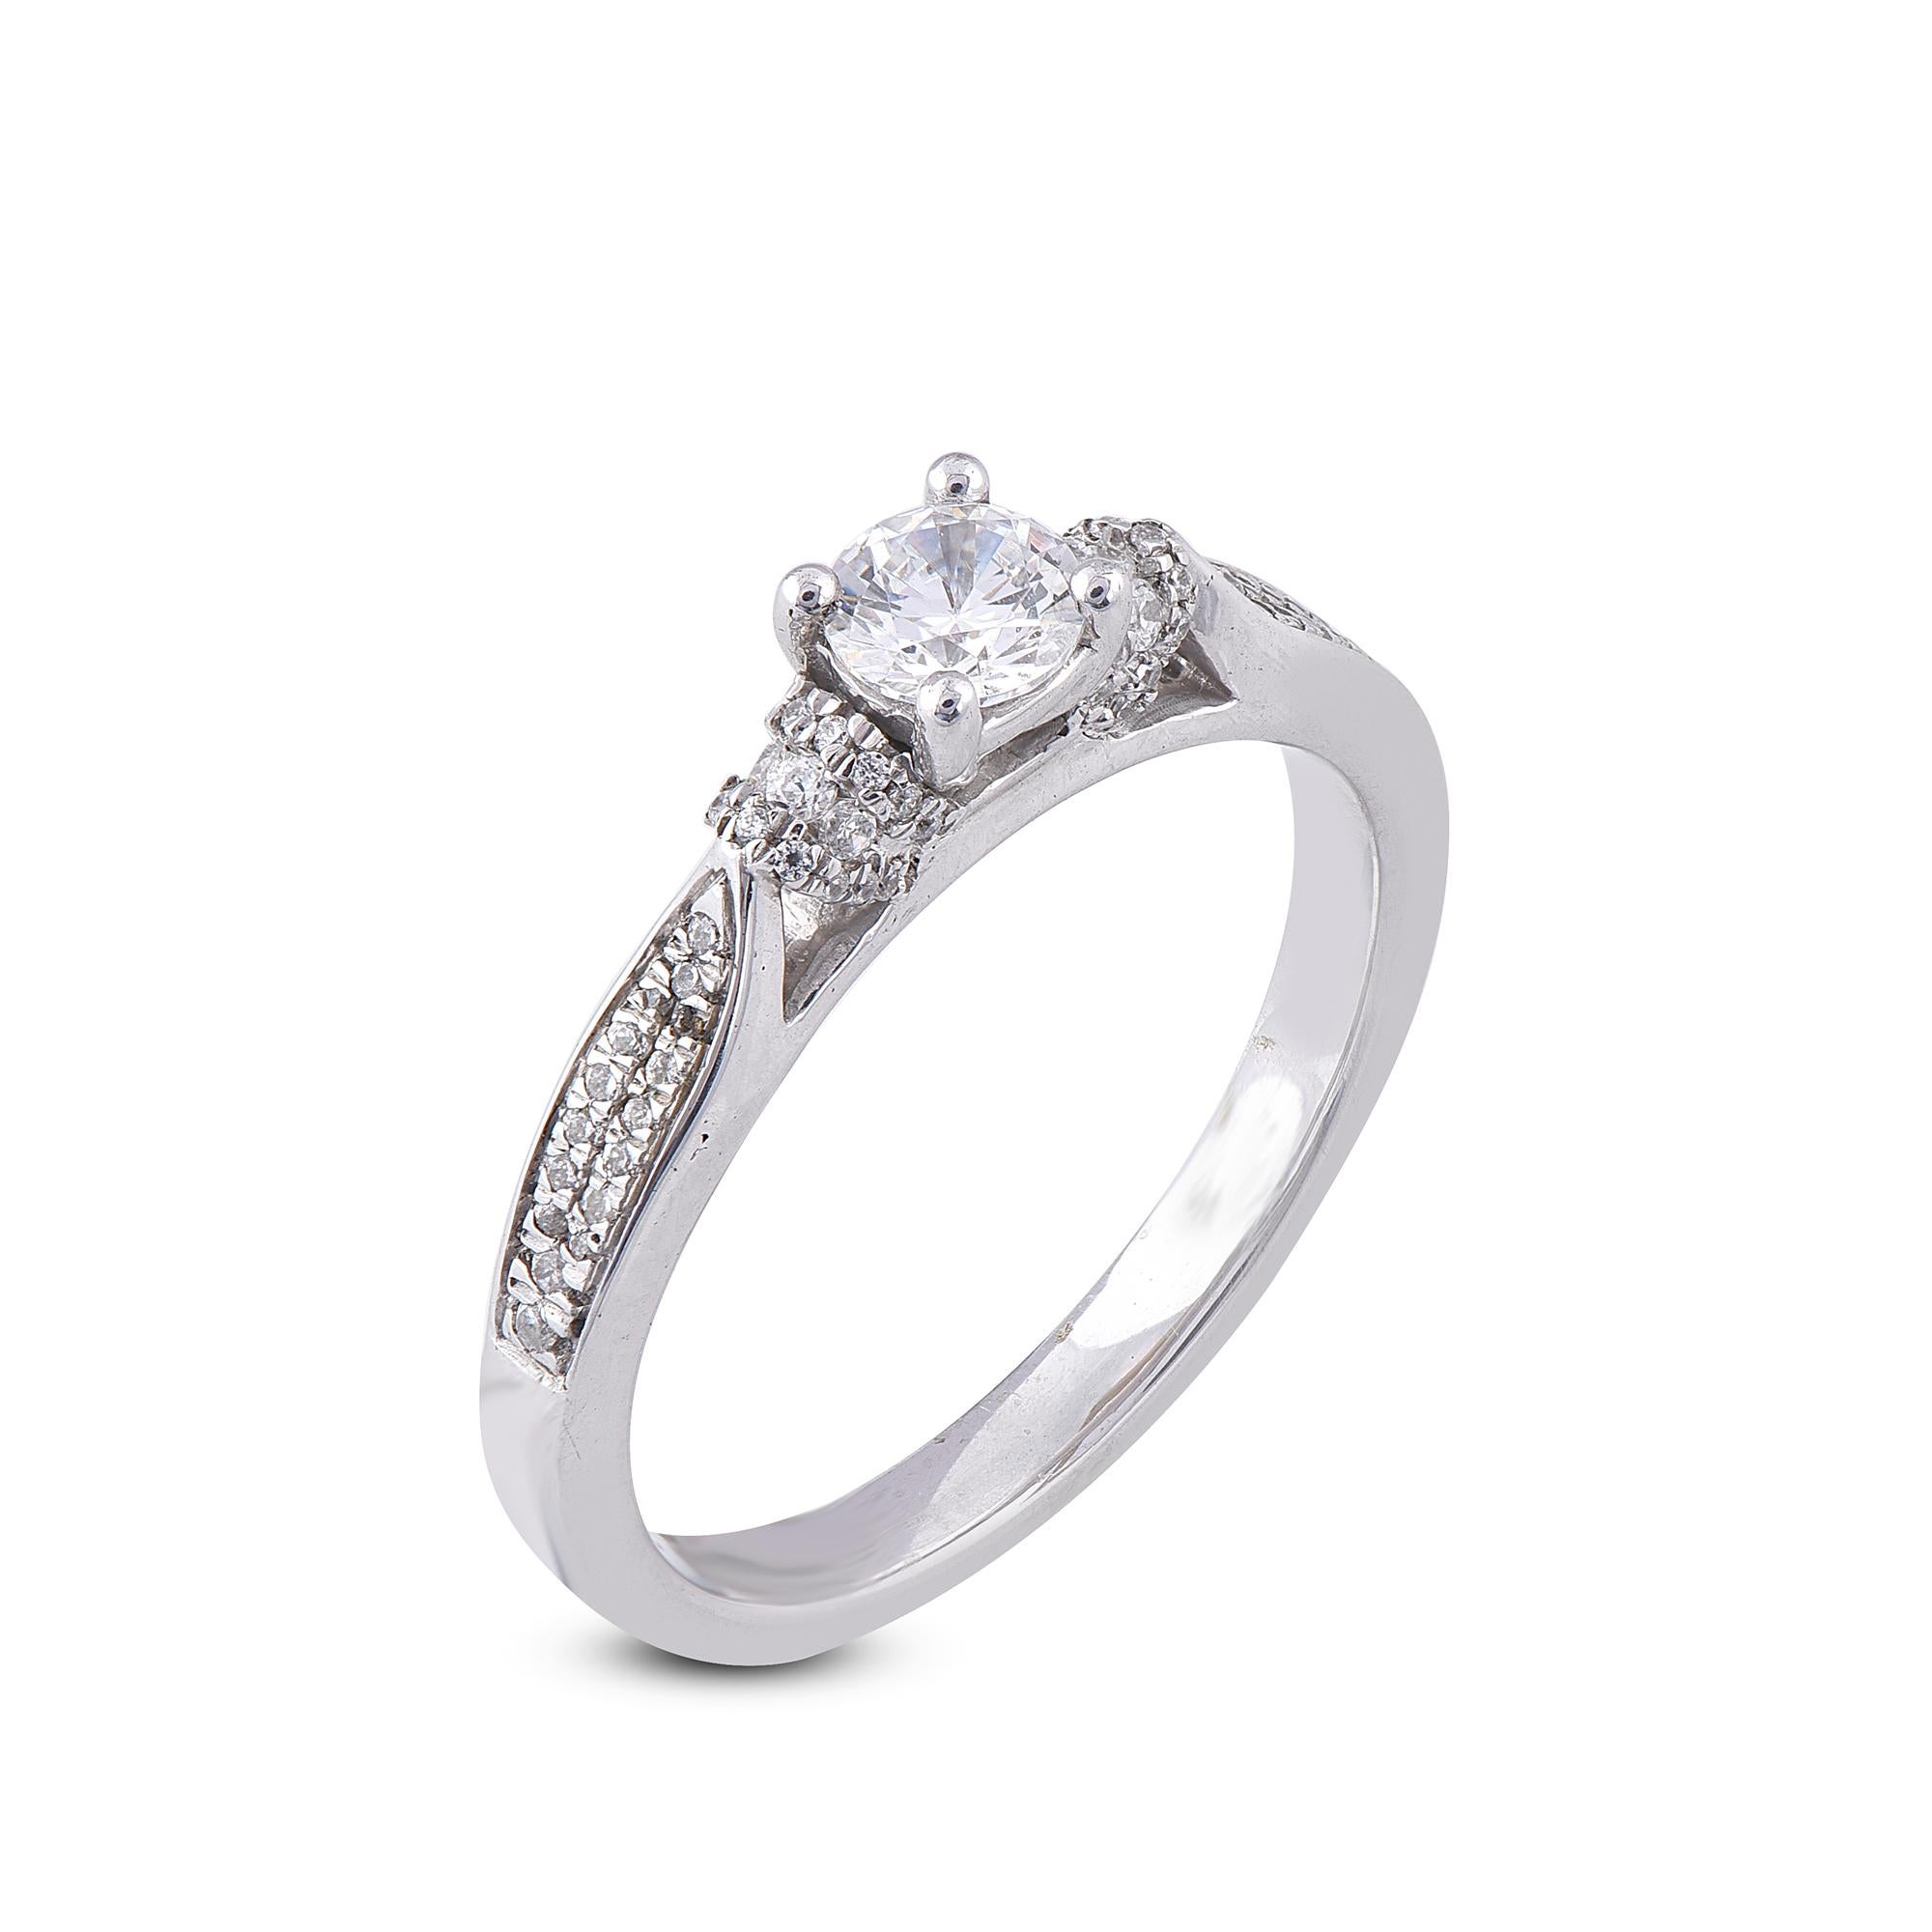 This engagement ring features 0.33 ct of centre stone and 0.17 ct of lined diamonds. Expertly Crafted of sparkling 18 karat white gold in high polish finish and set with 71 sparkling round diamonds set in channel and prong setting, with G-H Color